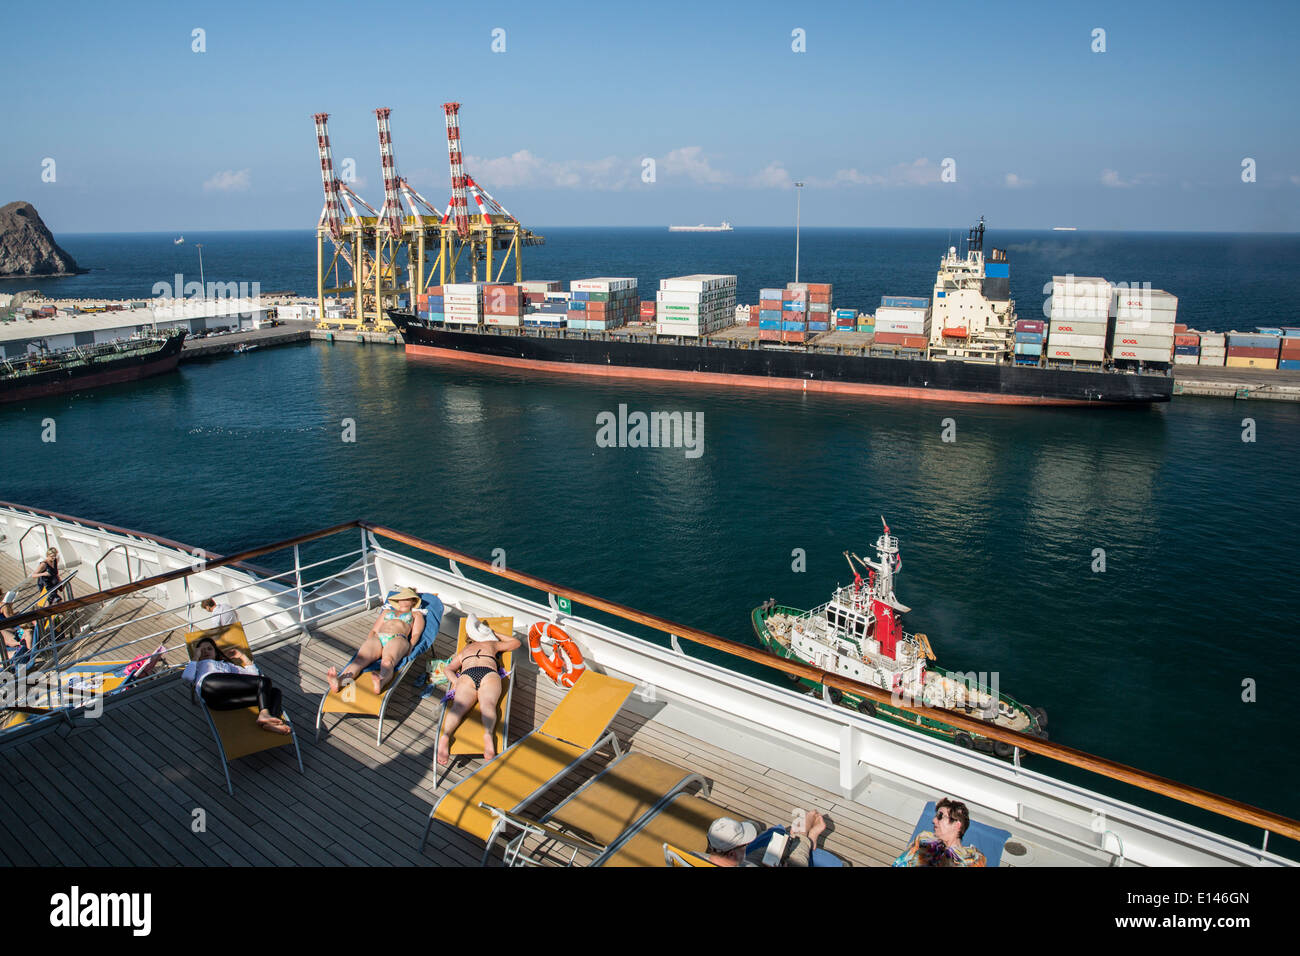 Oman, Muscat, Harbor Mina As Sultan Qaboos. Port of containers. View from Costa Fortuna cruise ship Stock Photo